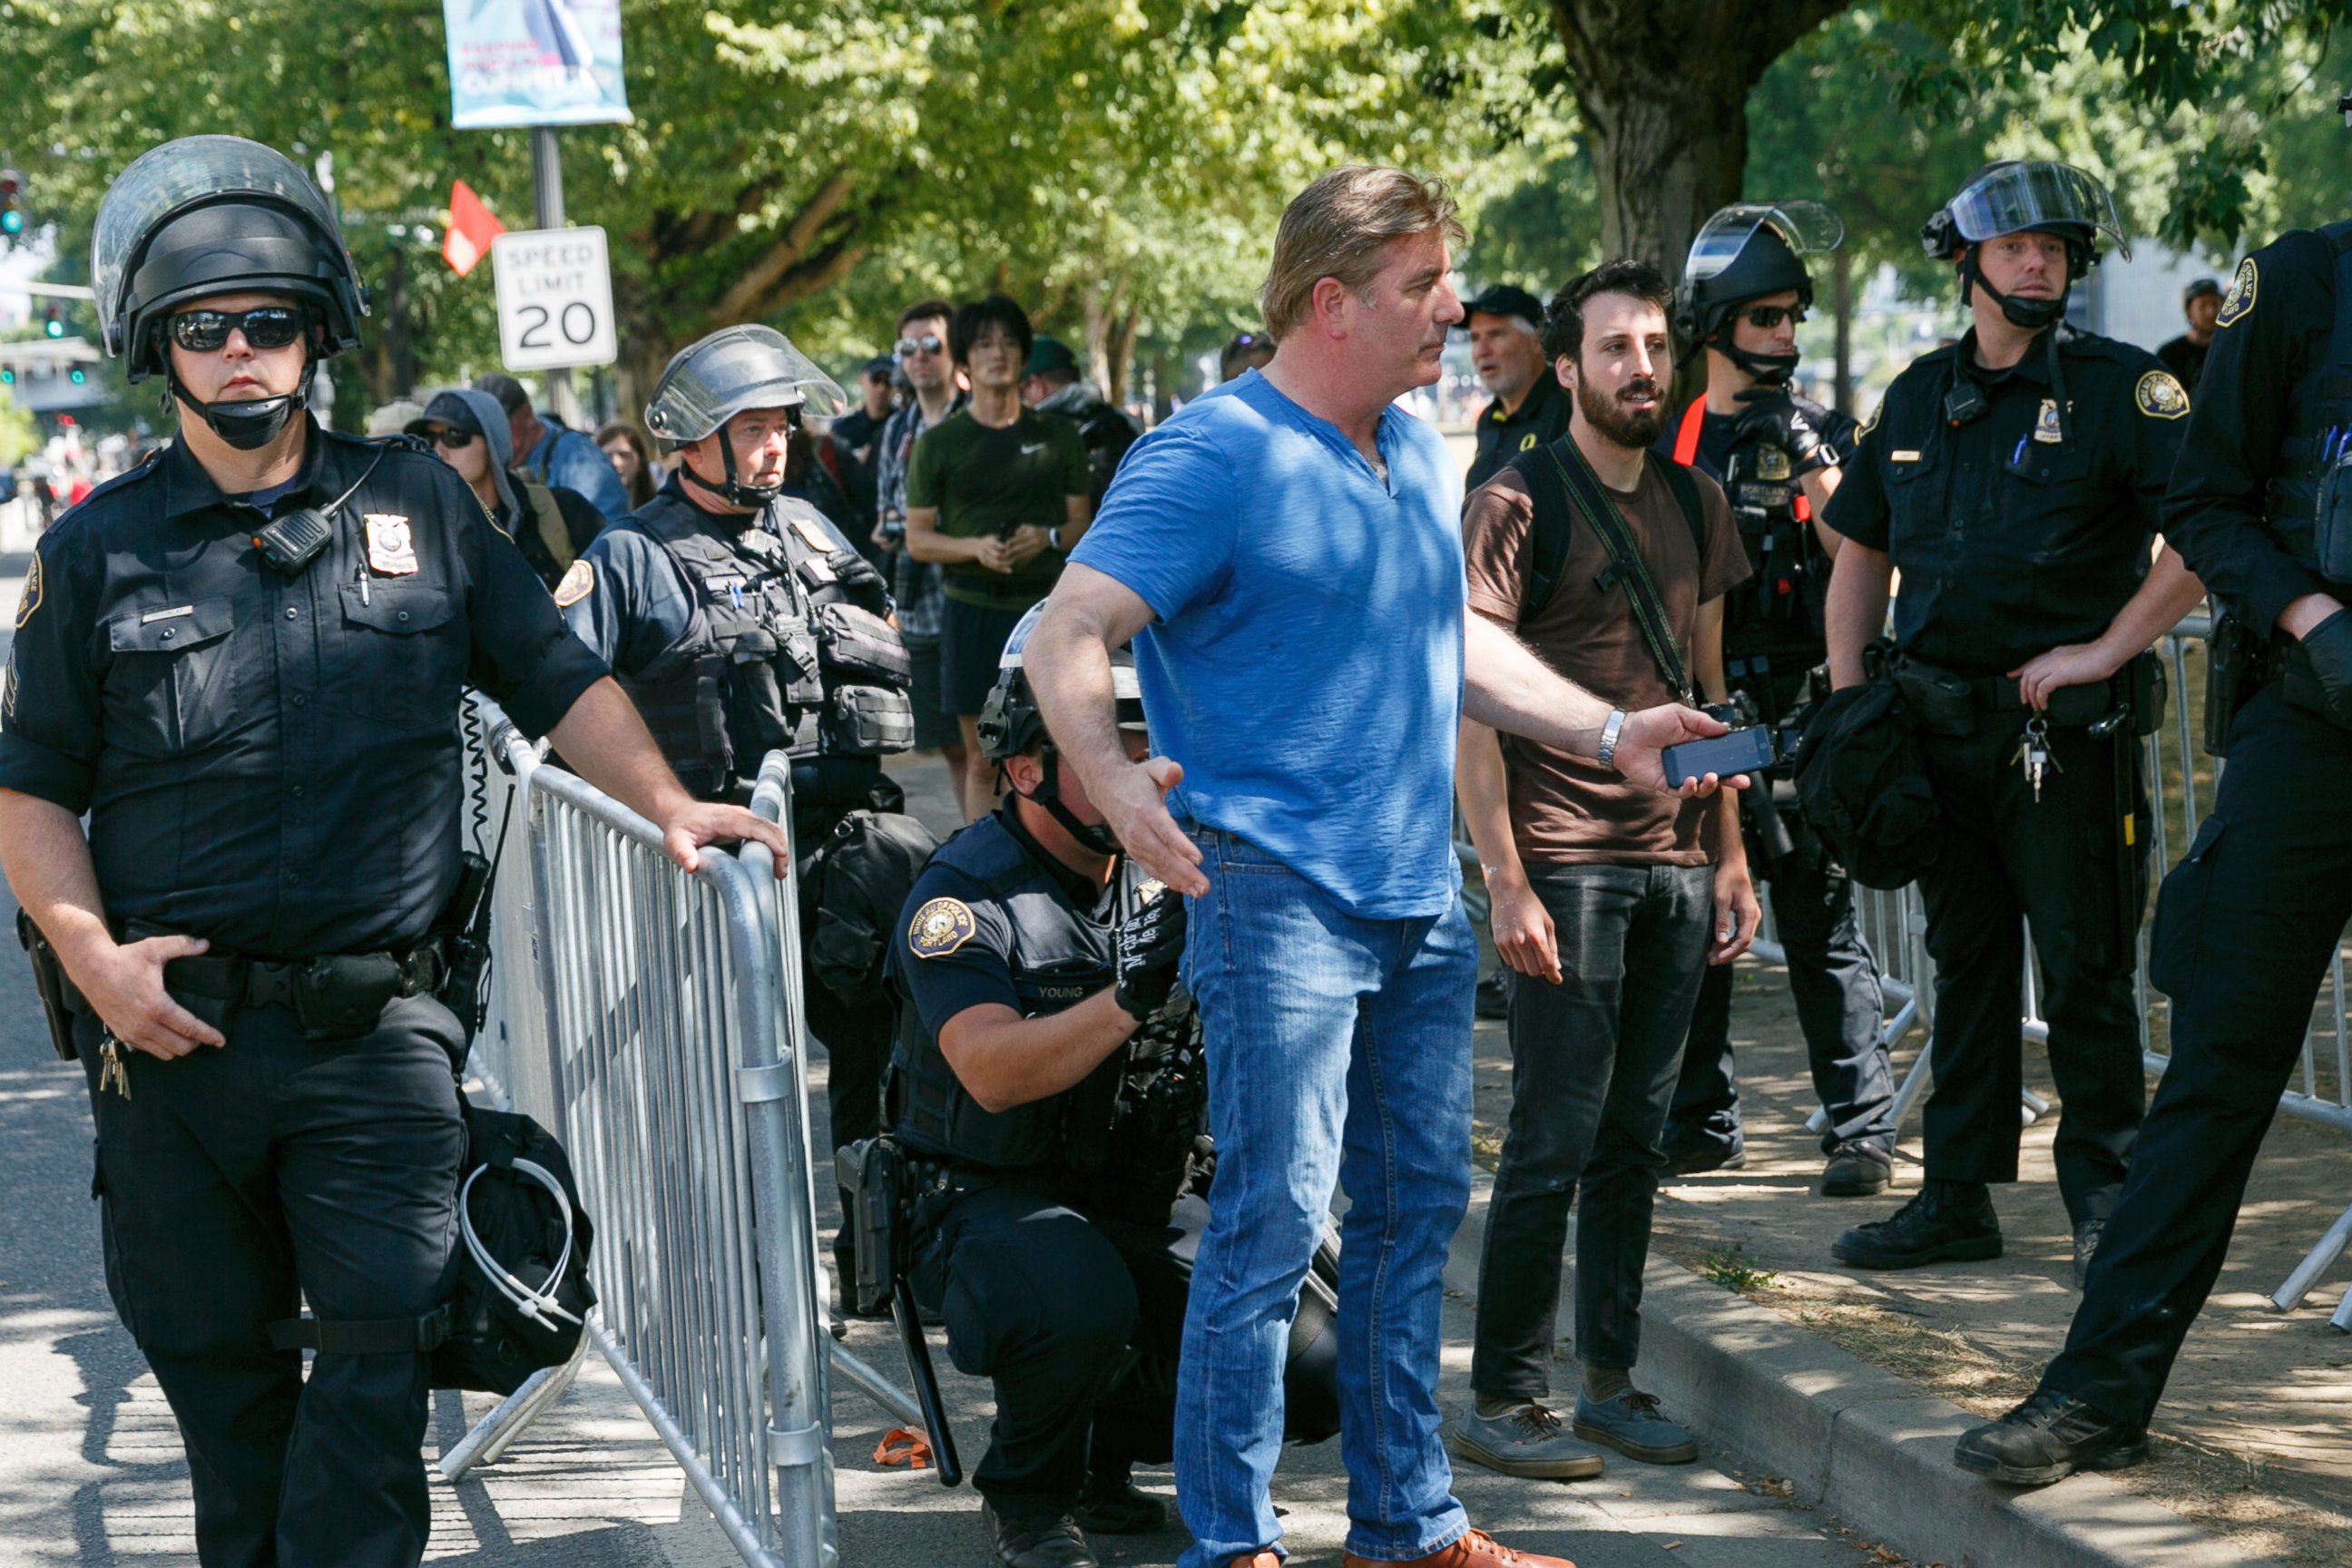 Police search a person before entering a rally in Portland, Ore., Saturday, Aug. 4, 2018.